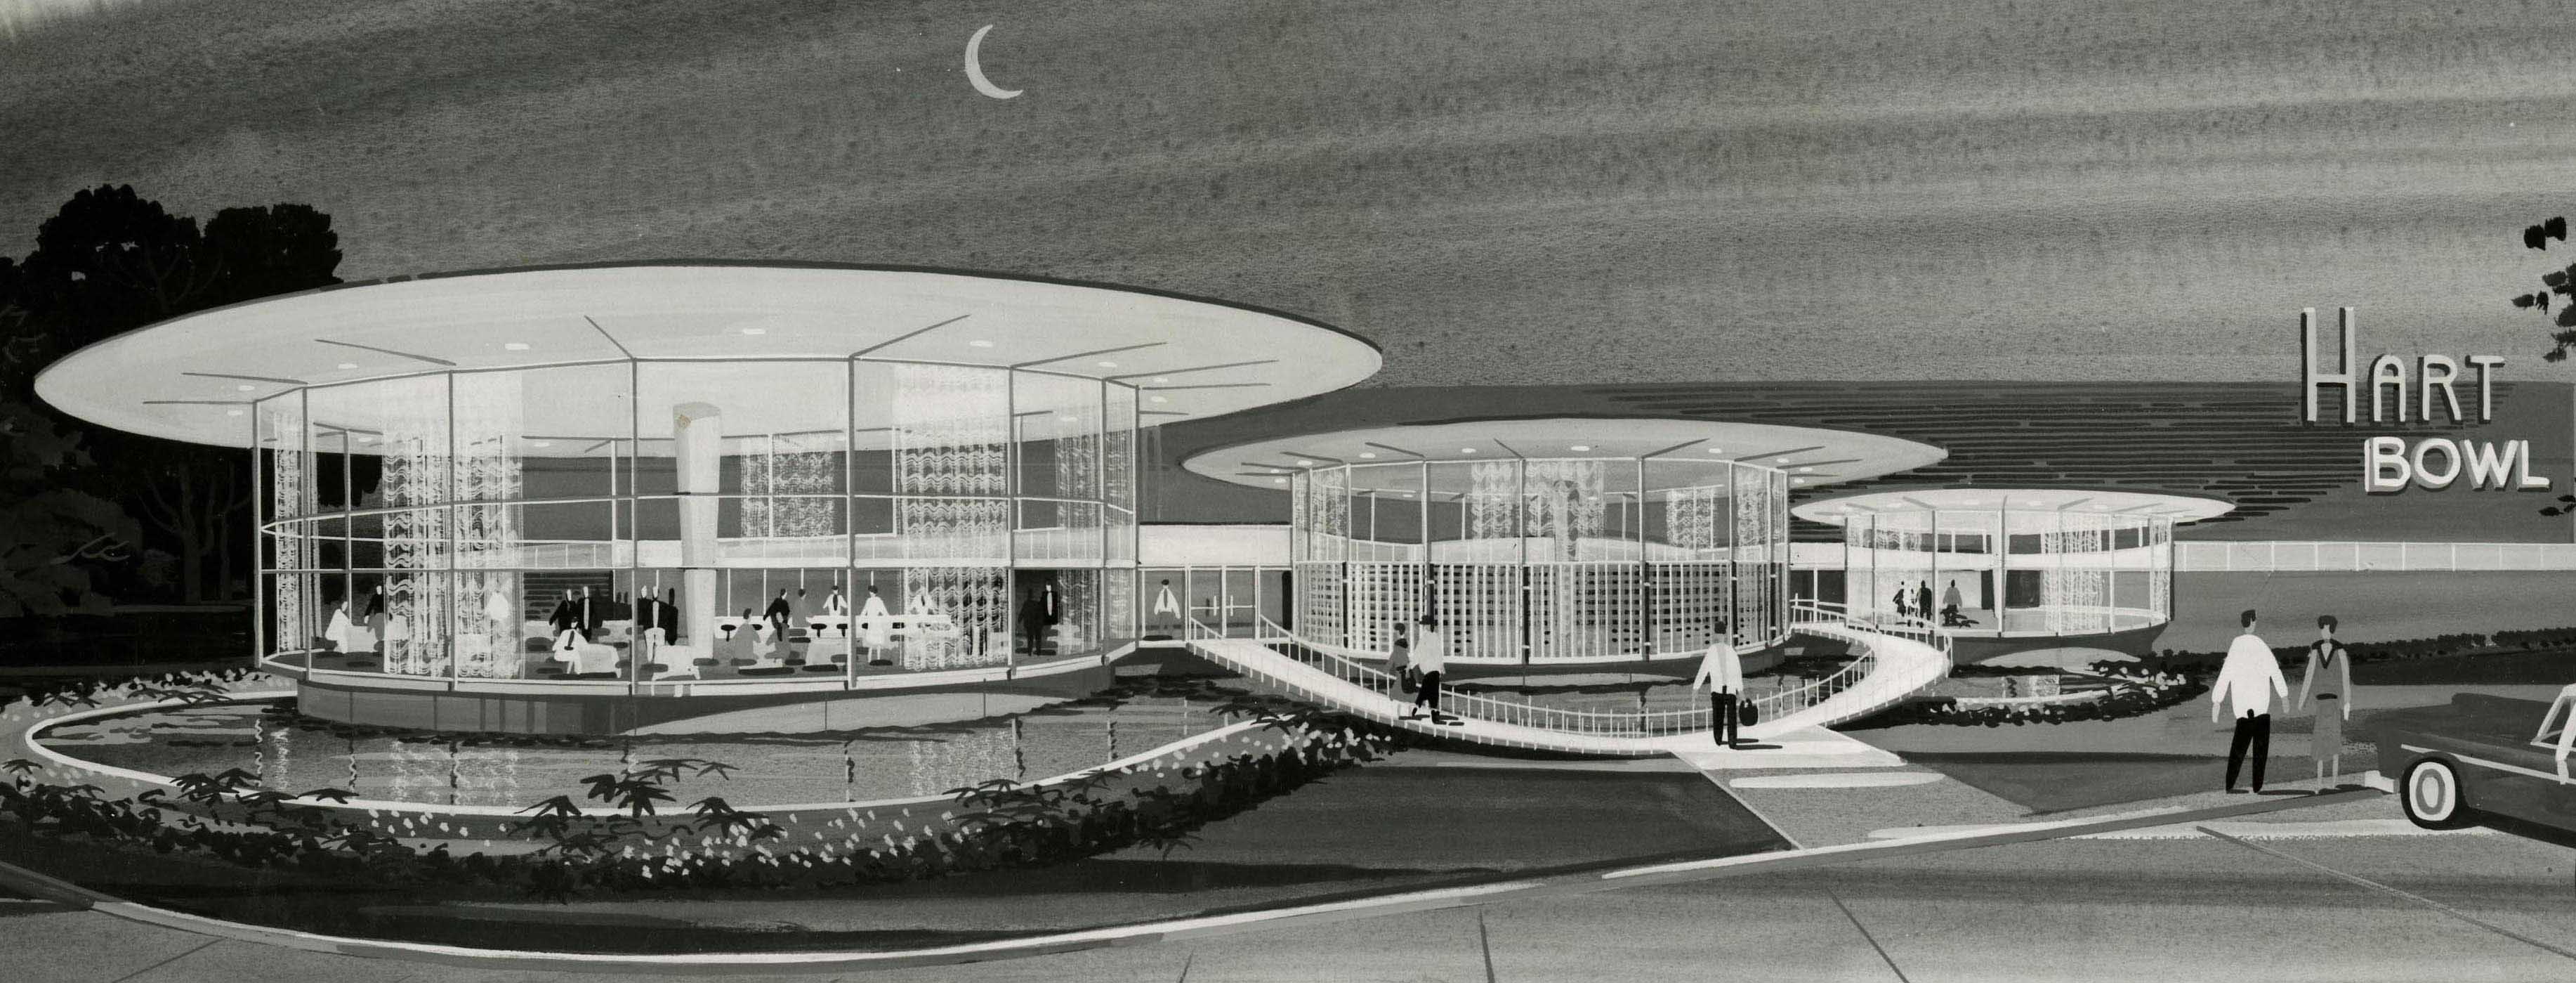 The image is a grey-scale rendering of the Hart Bowl bowling alley. The building features three striking circular glass enclosures on the front, one each for a restaurant, a lounge, and a children’s play area. A pool with fountains encircles the front and a sweeping ramp leads to the entrance. From the George Dahl collection